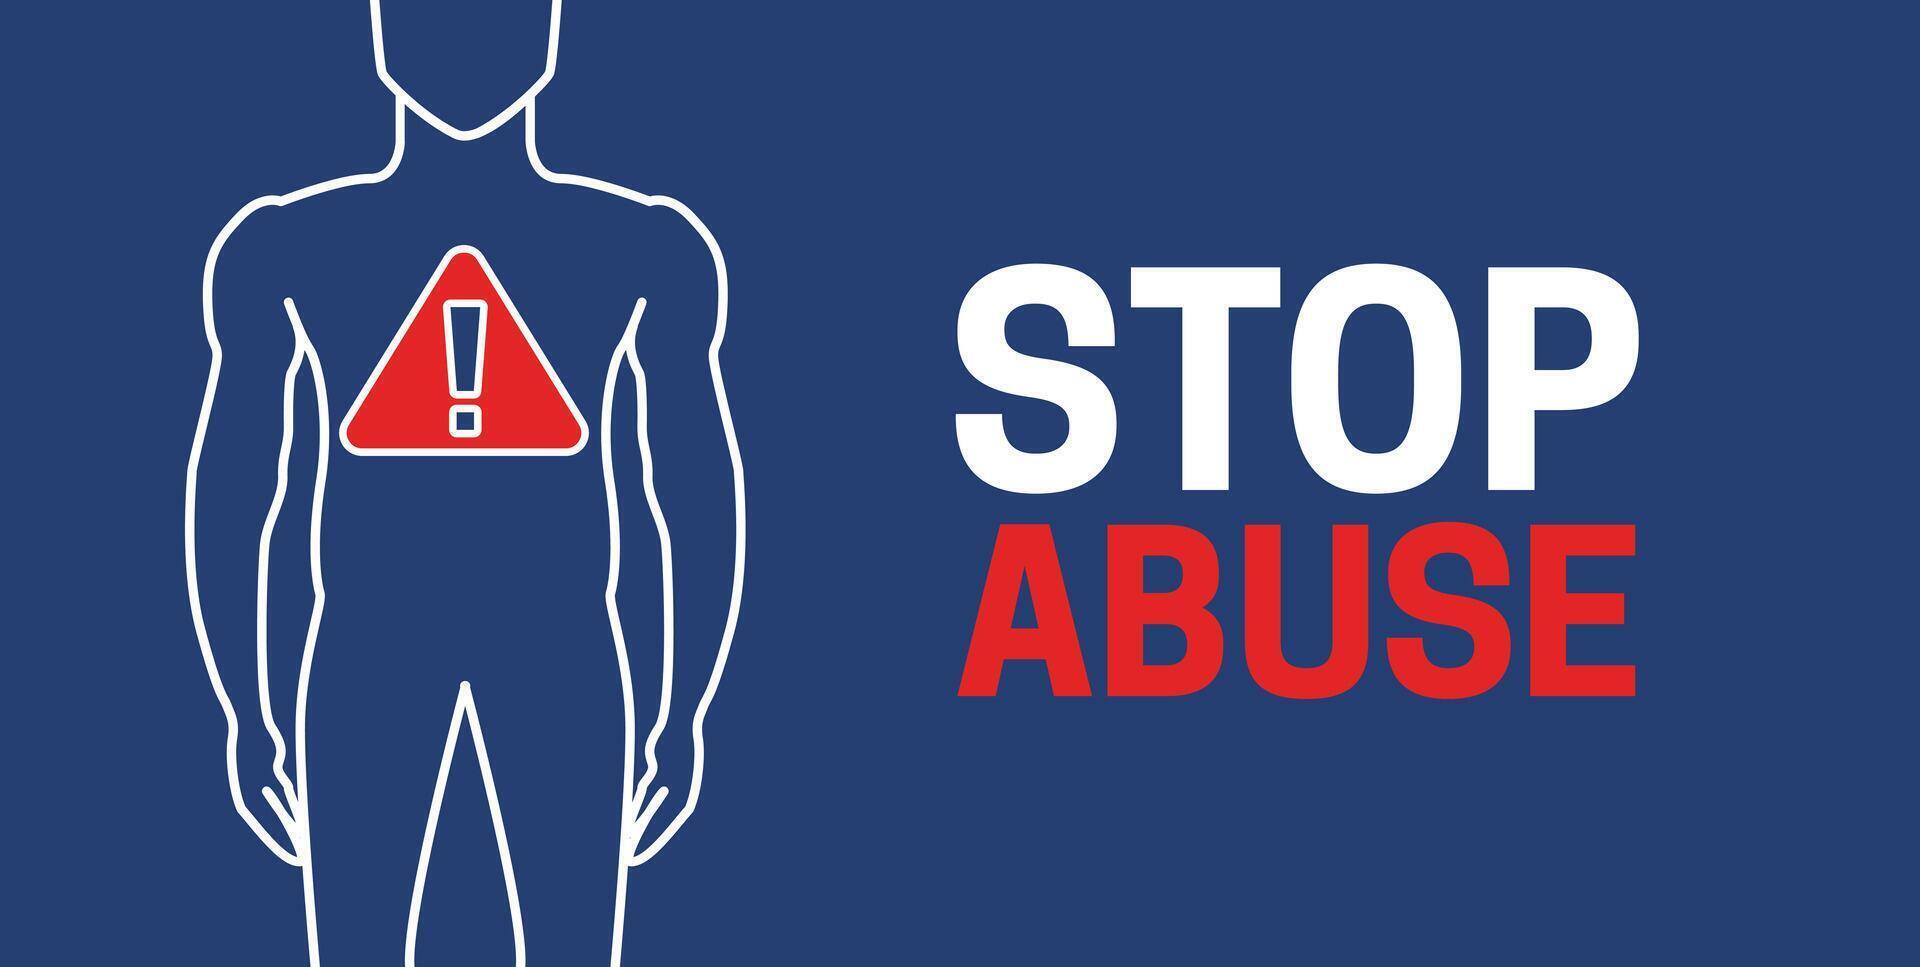 Stop Abuse Background Illustration with a Man vector